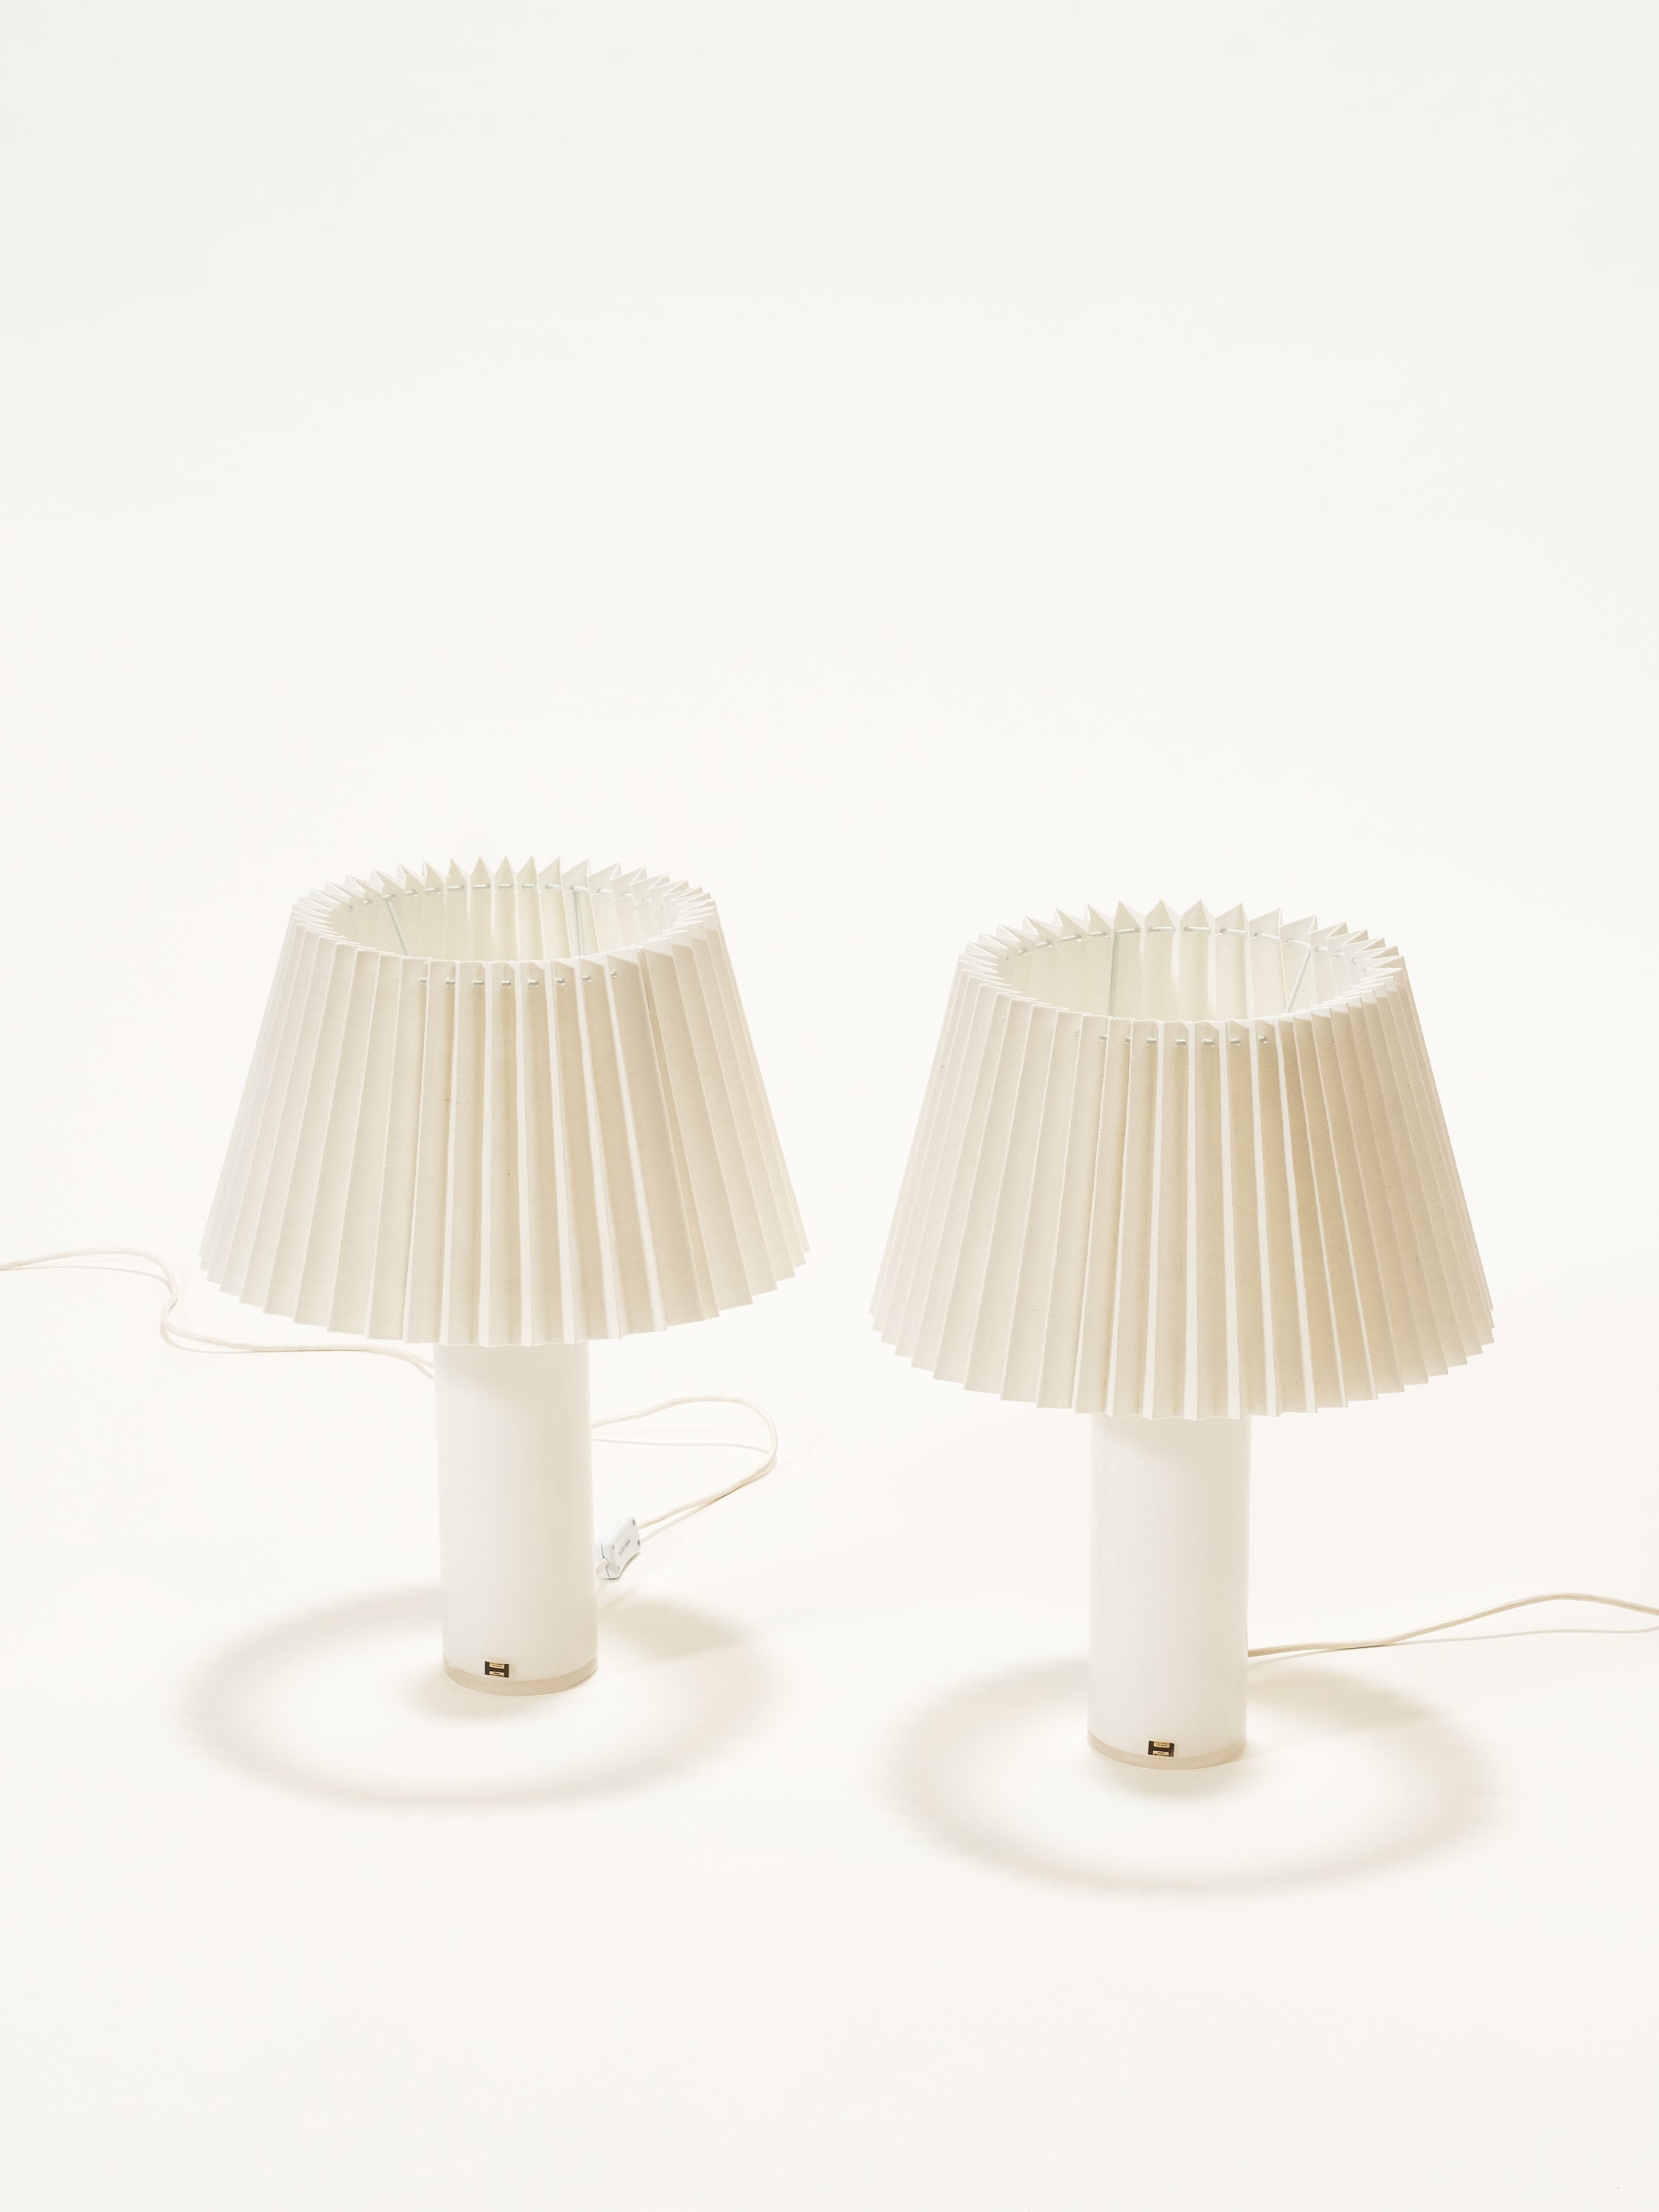 Pair of White Glass Table Lamps by Gert Nyström for Hyllinge, Sweden, 1960s